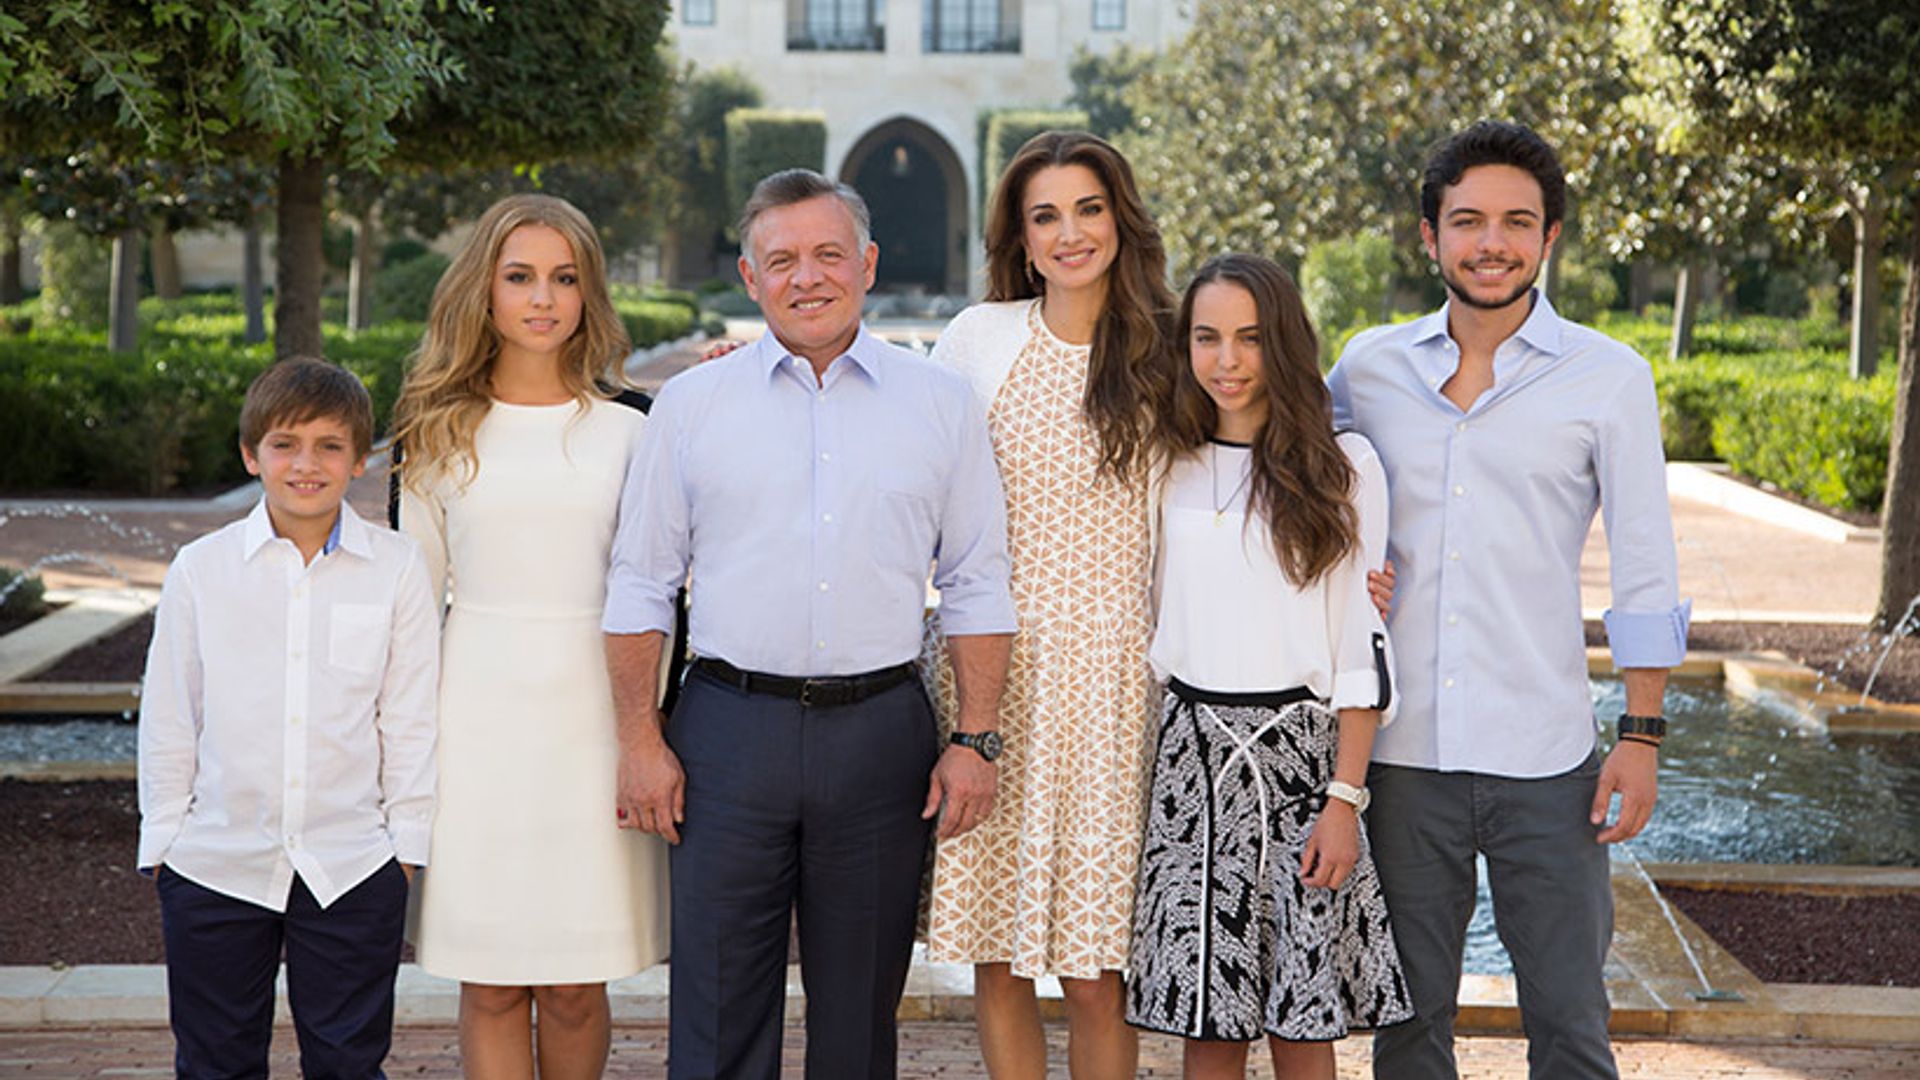 Queen Rania of Jordan talks about family ties, empowering women and championing the young